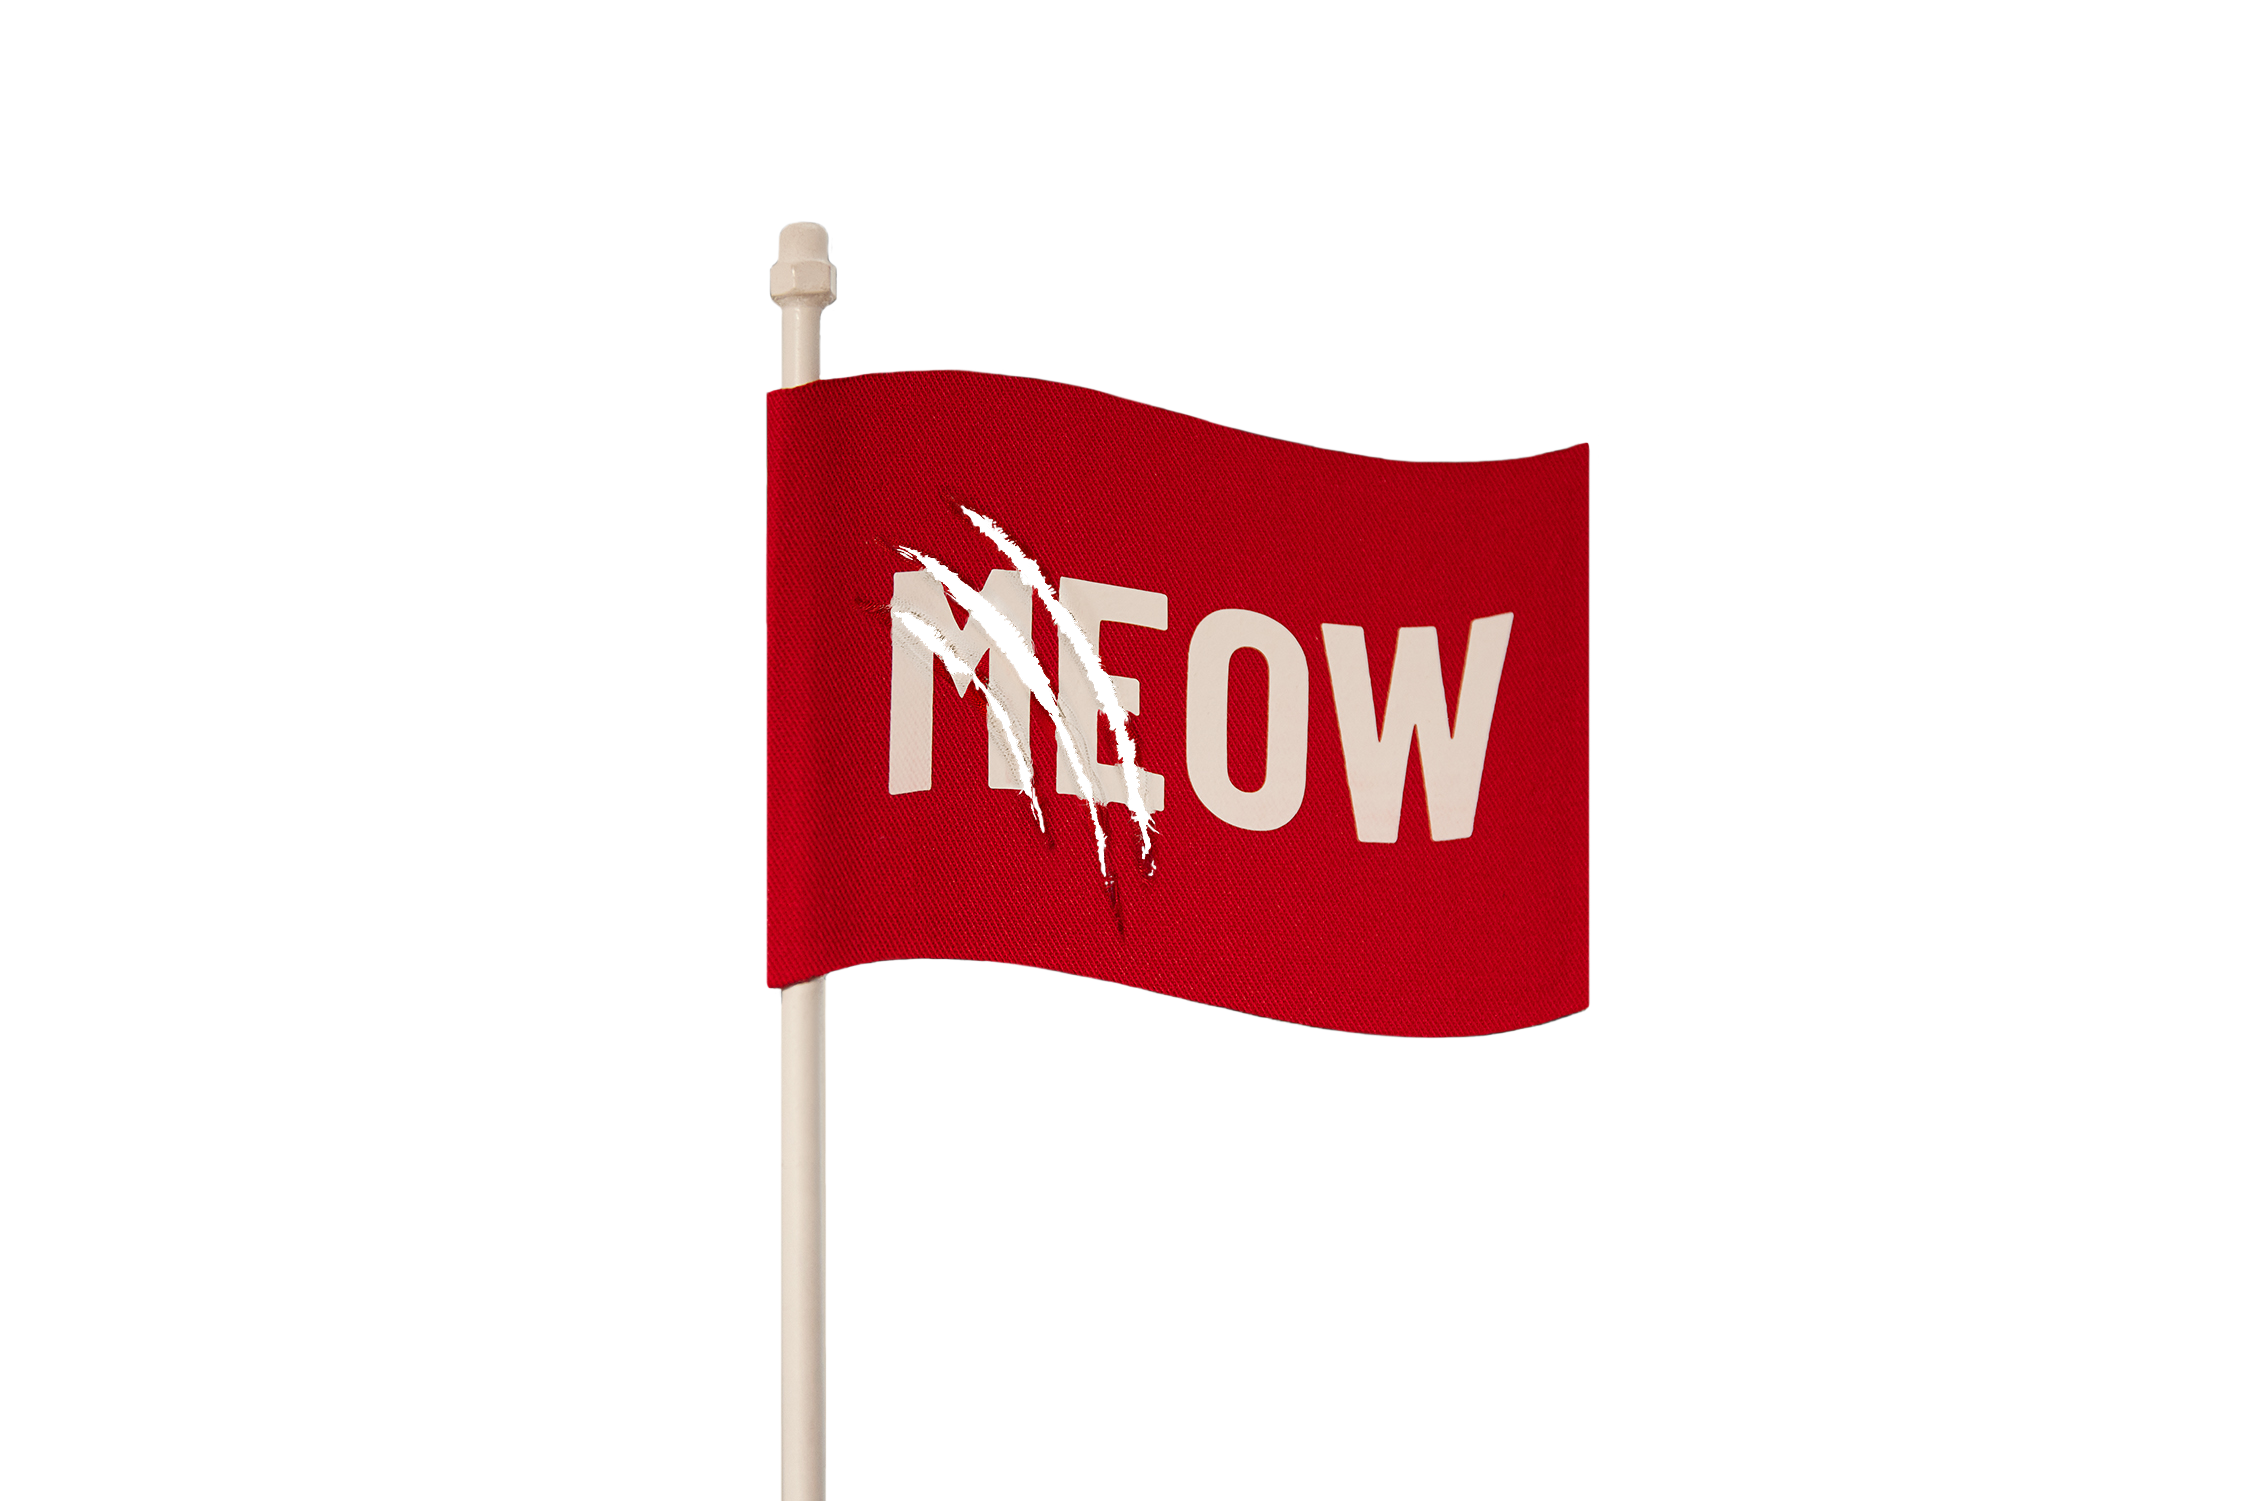 Red Flag saying Meow with cat scratches across the letters